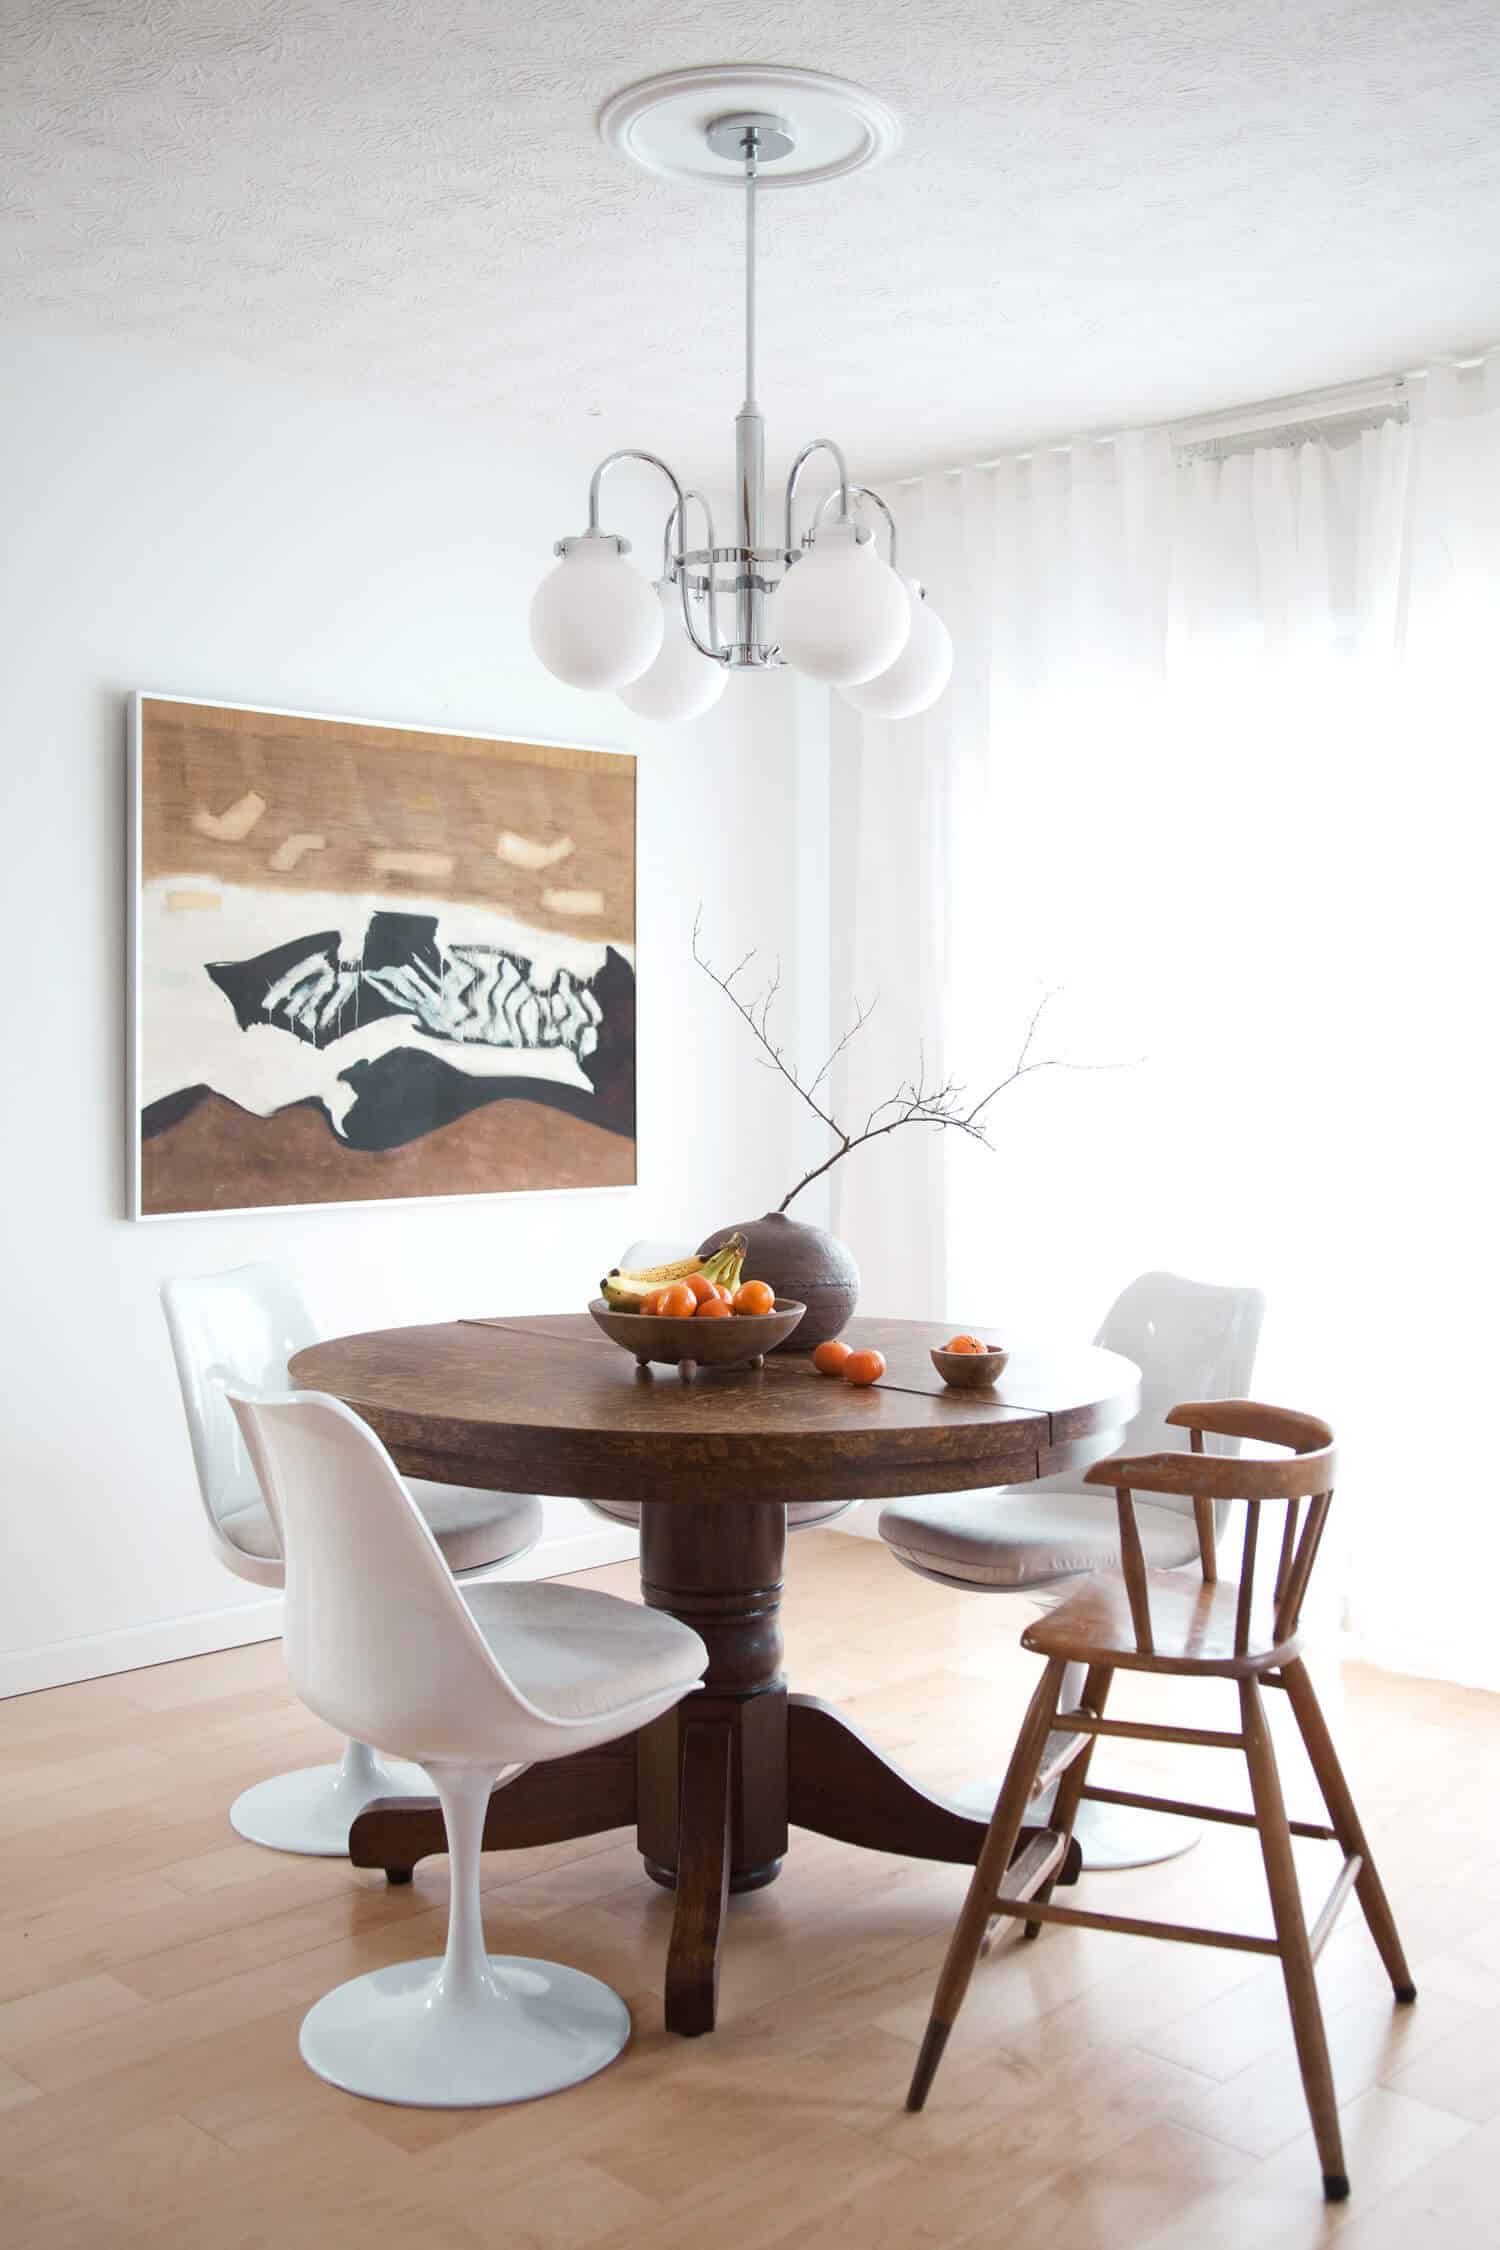 Antique pedestal table with modern tulip chairs